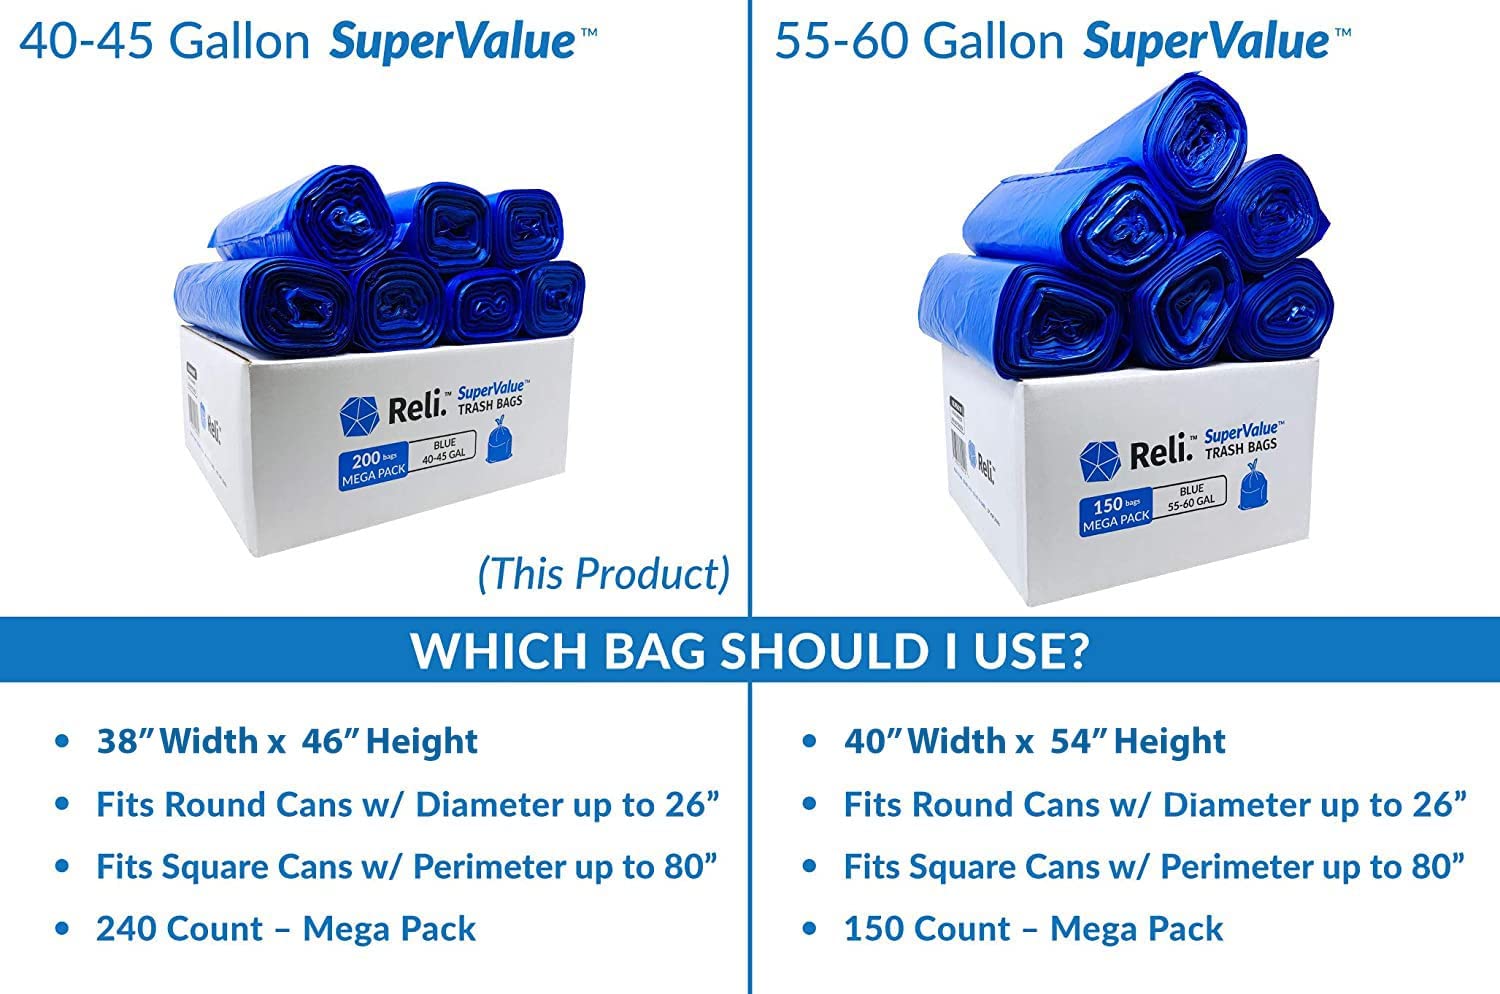 https://discounttoday.net/wp-content/uploads/2022/11/Reli.-SuperValue-40-45-Gallon-Recycling-Bags-200-Count-Bulk-Blue-Trash-Bags-for-Recycling-Made-in-USA-40-Gallon-42-Gallon-45-Gallon-Trash-Bags-Large-Garbage-BagsCan-Liners-40-45-Gal-Blue...jpg